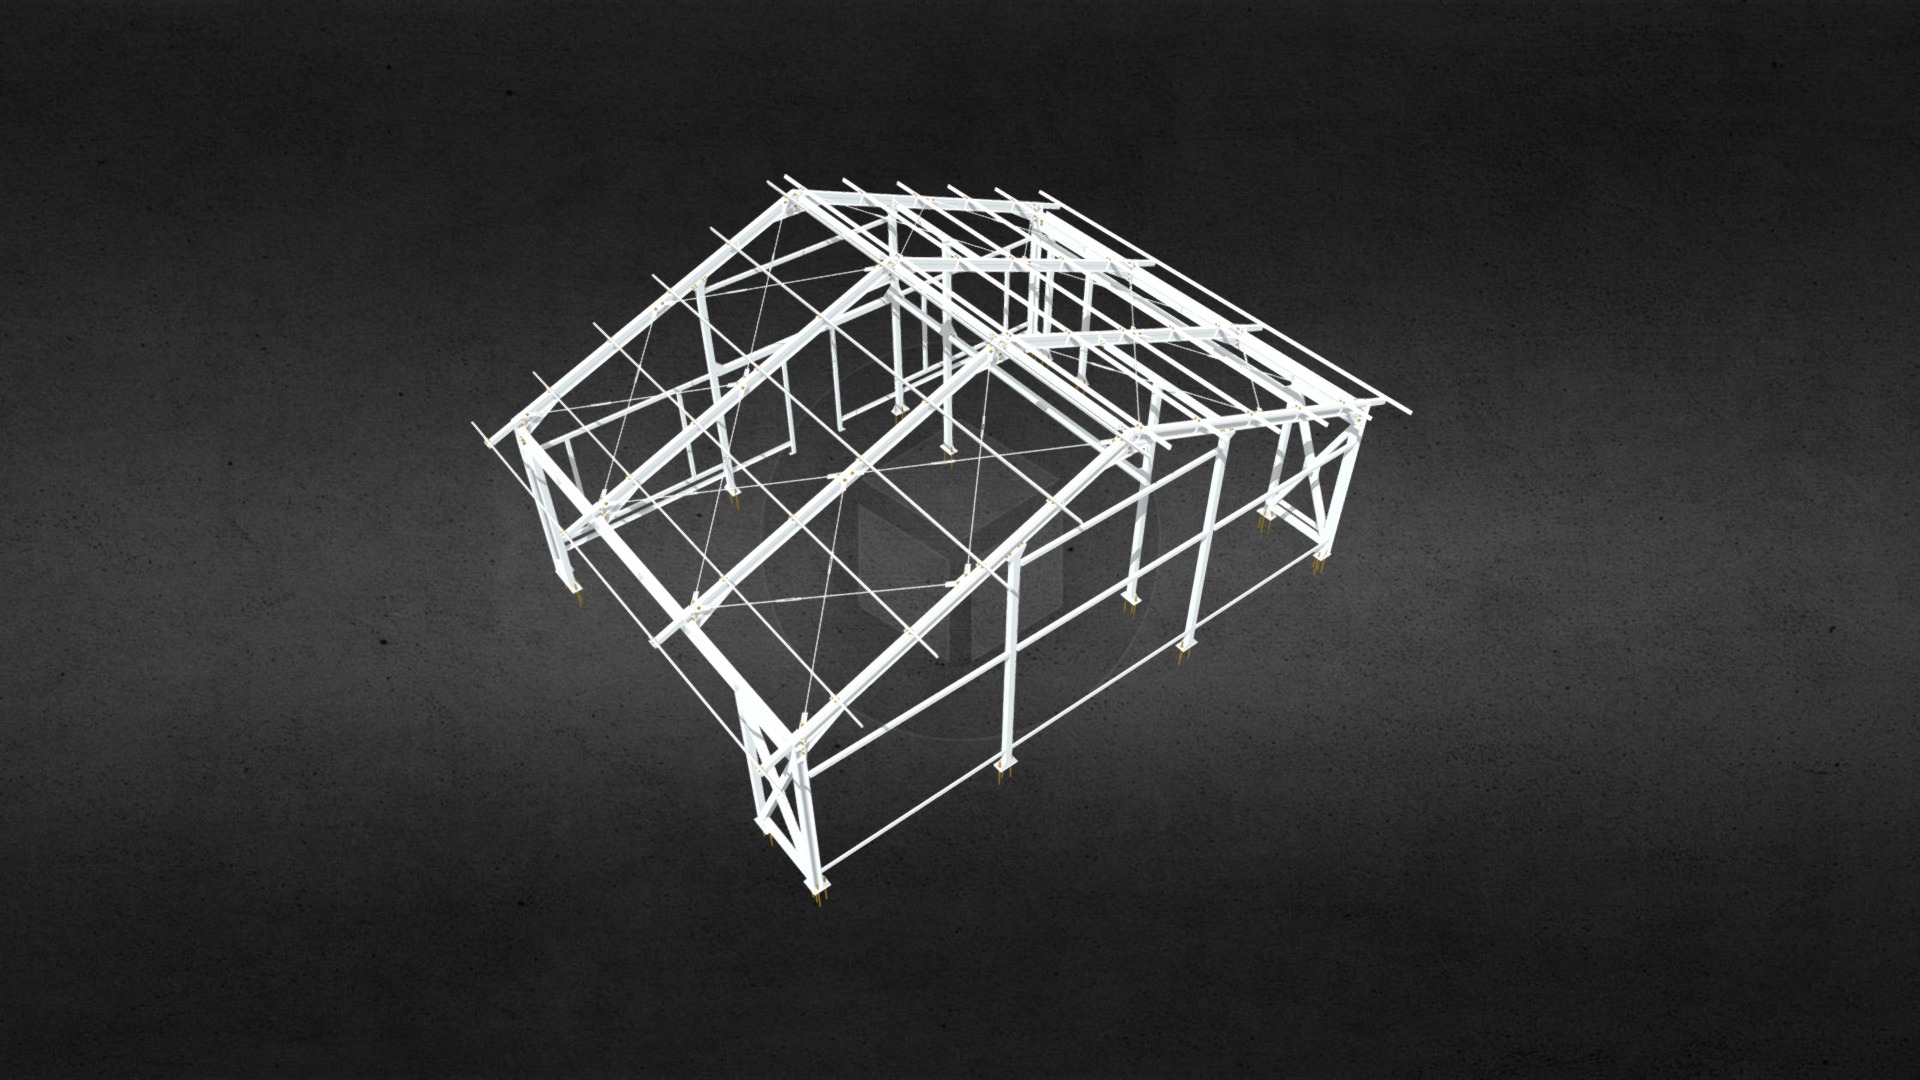 3D model Garage & sport room – structures europrofile - This is a 3D model of the Garage & sport room - structures europrofile. The 3D model is about a black and white image of a cube with a pointy top.